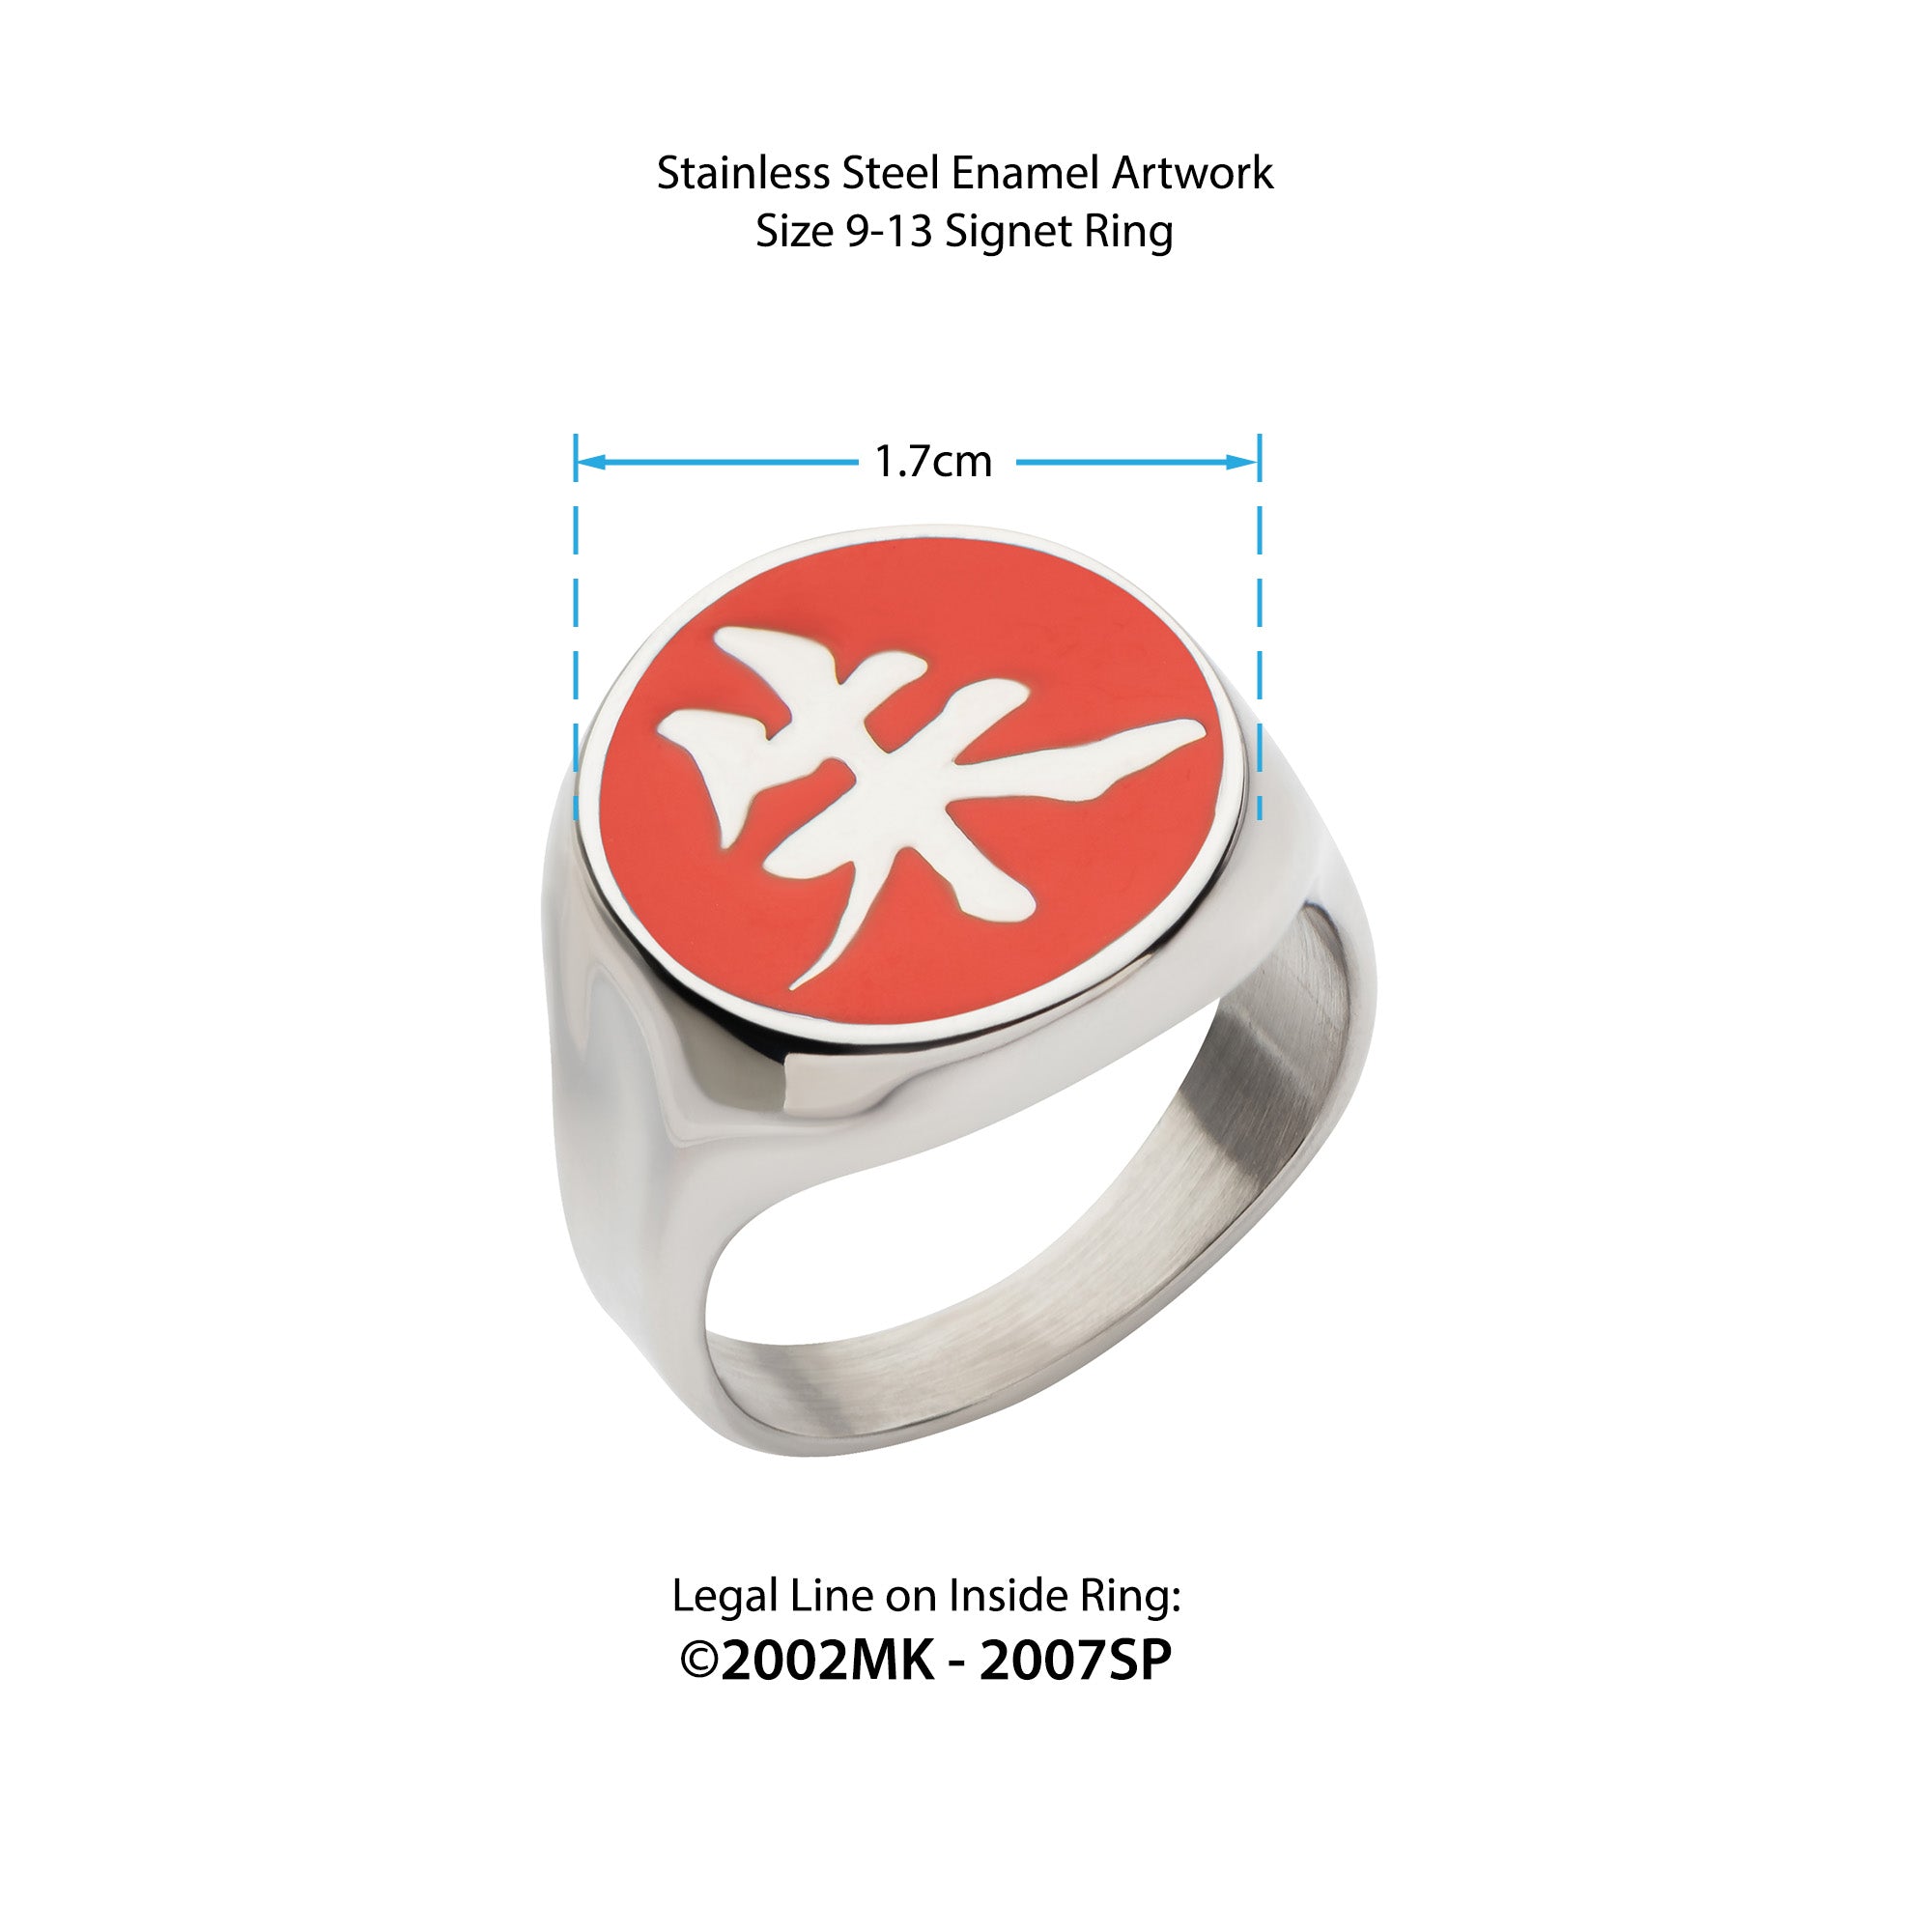 Anime Cosplay Ring Set Akatsuki Itachi Ring For Women Men Metal Finger  Jewelry Accessories Cool Best Friend Child Gift